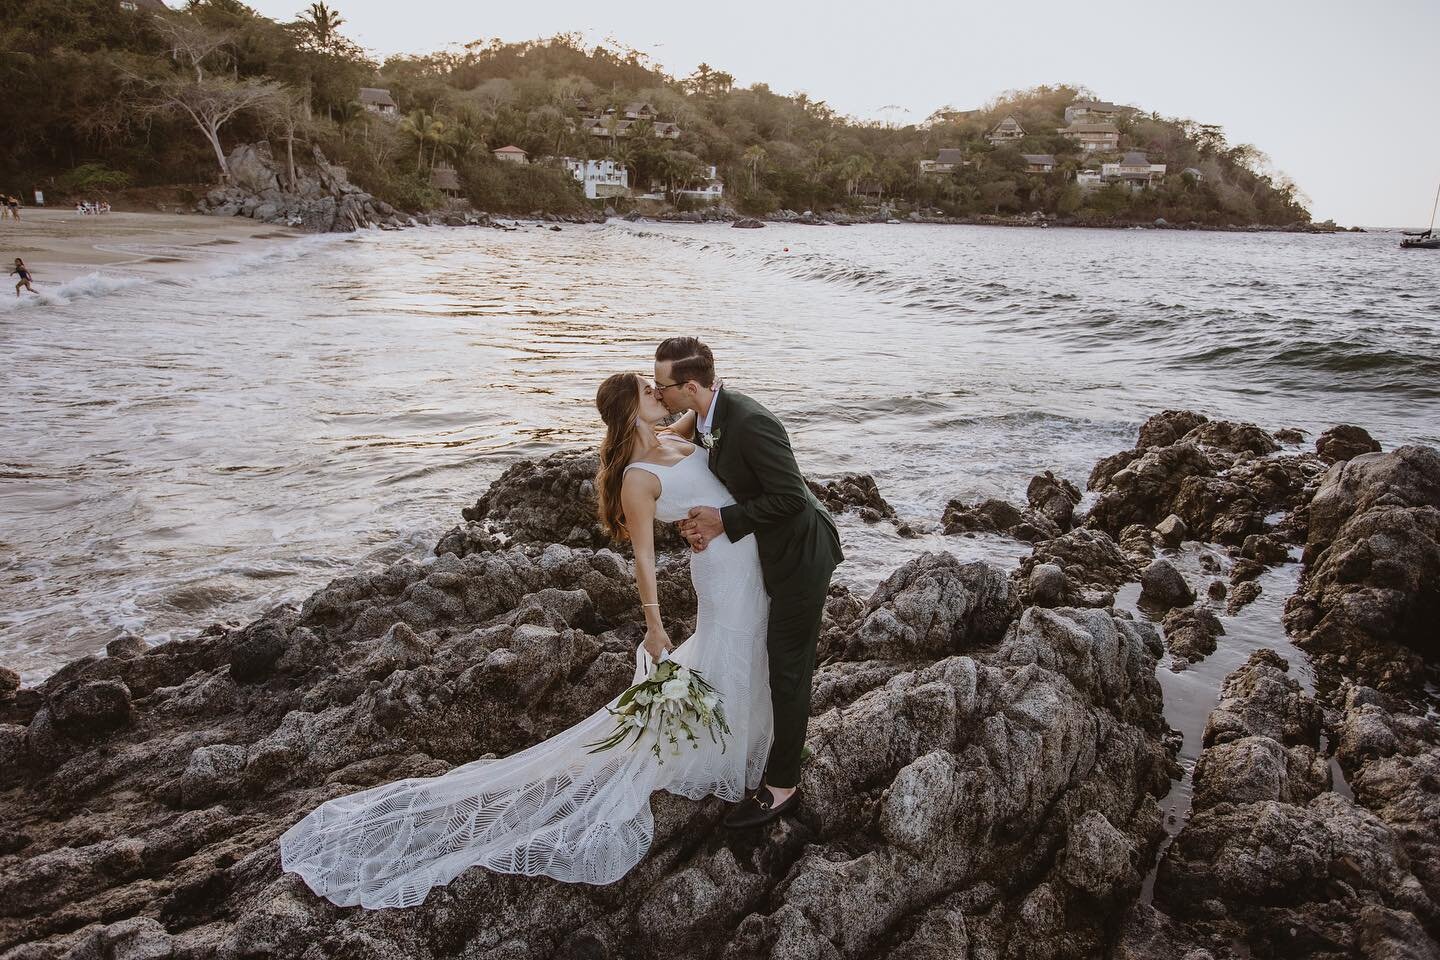 Does it get any more picturesque than this? We can&rsquo;t get enough of this stunning gallery! @fulleredgestudio always outdoes themselves with their editorial style photos. This is every brides dream come true! 🤍

.

Photographer: @fulleredgestudi